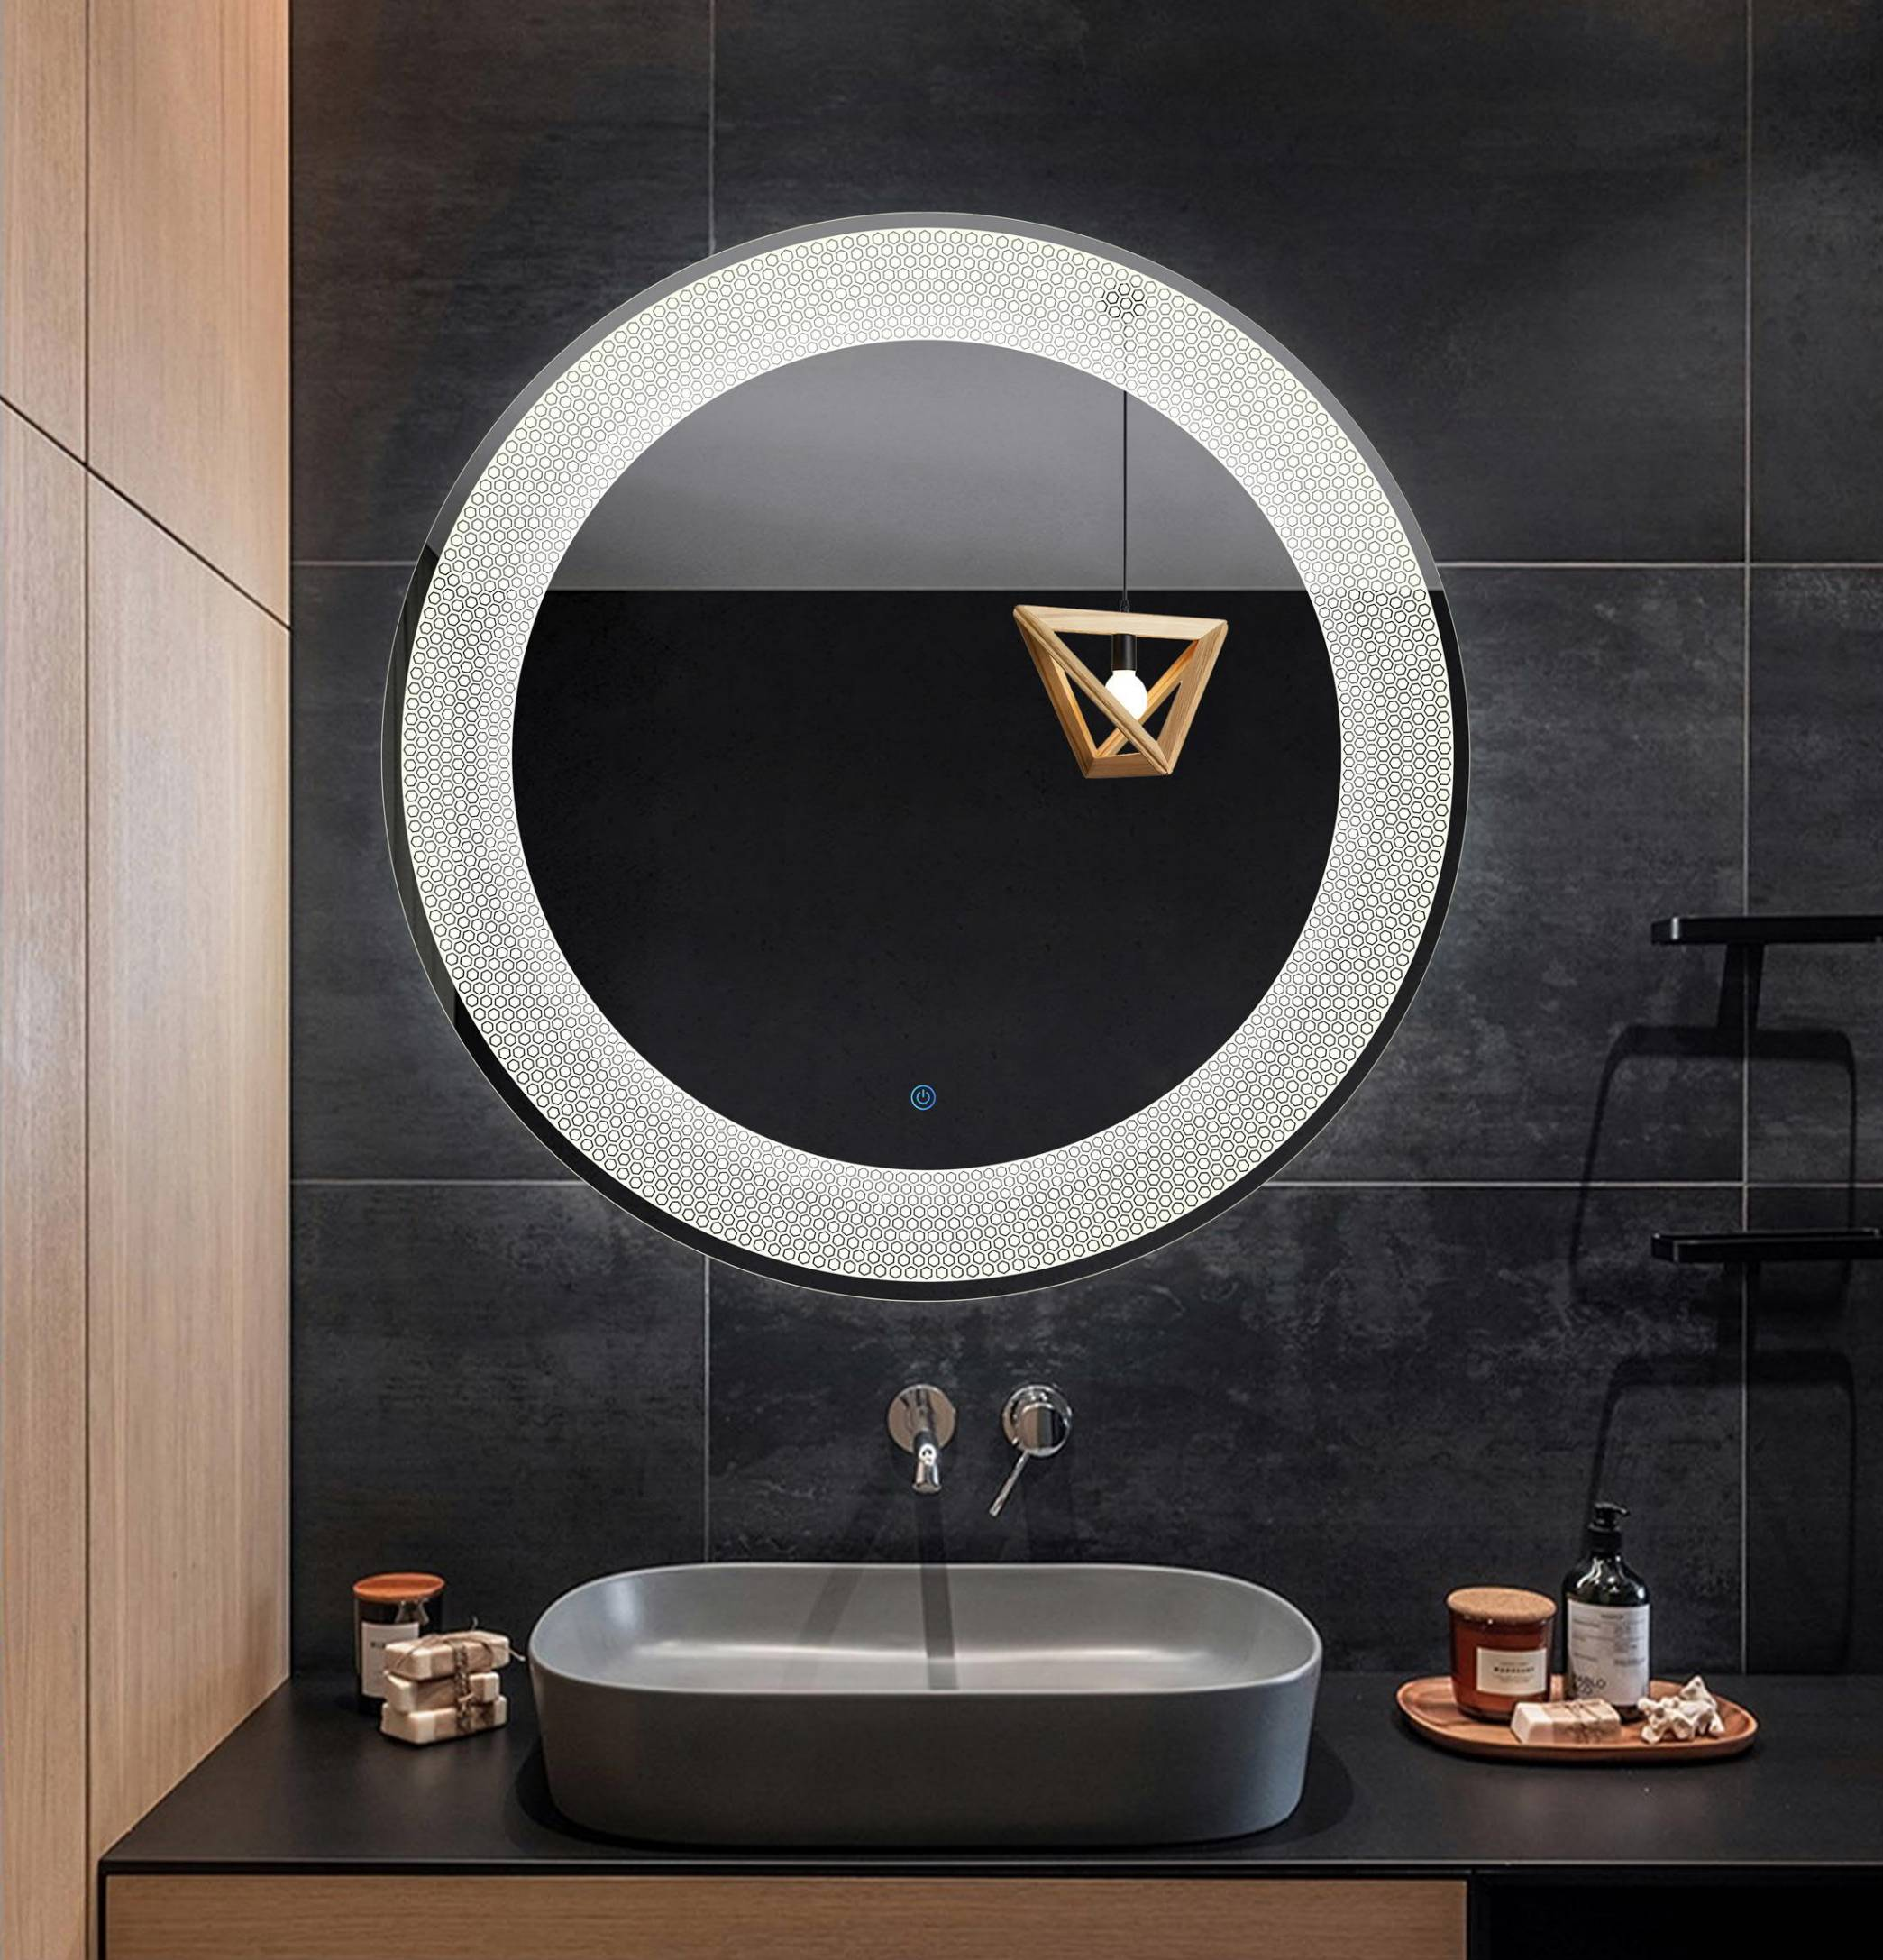 Round LED Mirror, Bathroom Wall Mounted Vanity Mirror with 3 Color Lights, Anti-Fog, Smart Touch Button And Memory Function, Dimmable Lighted Makeup Mirror for Bathroom